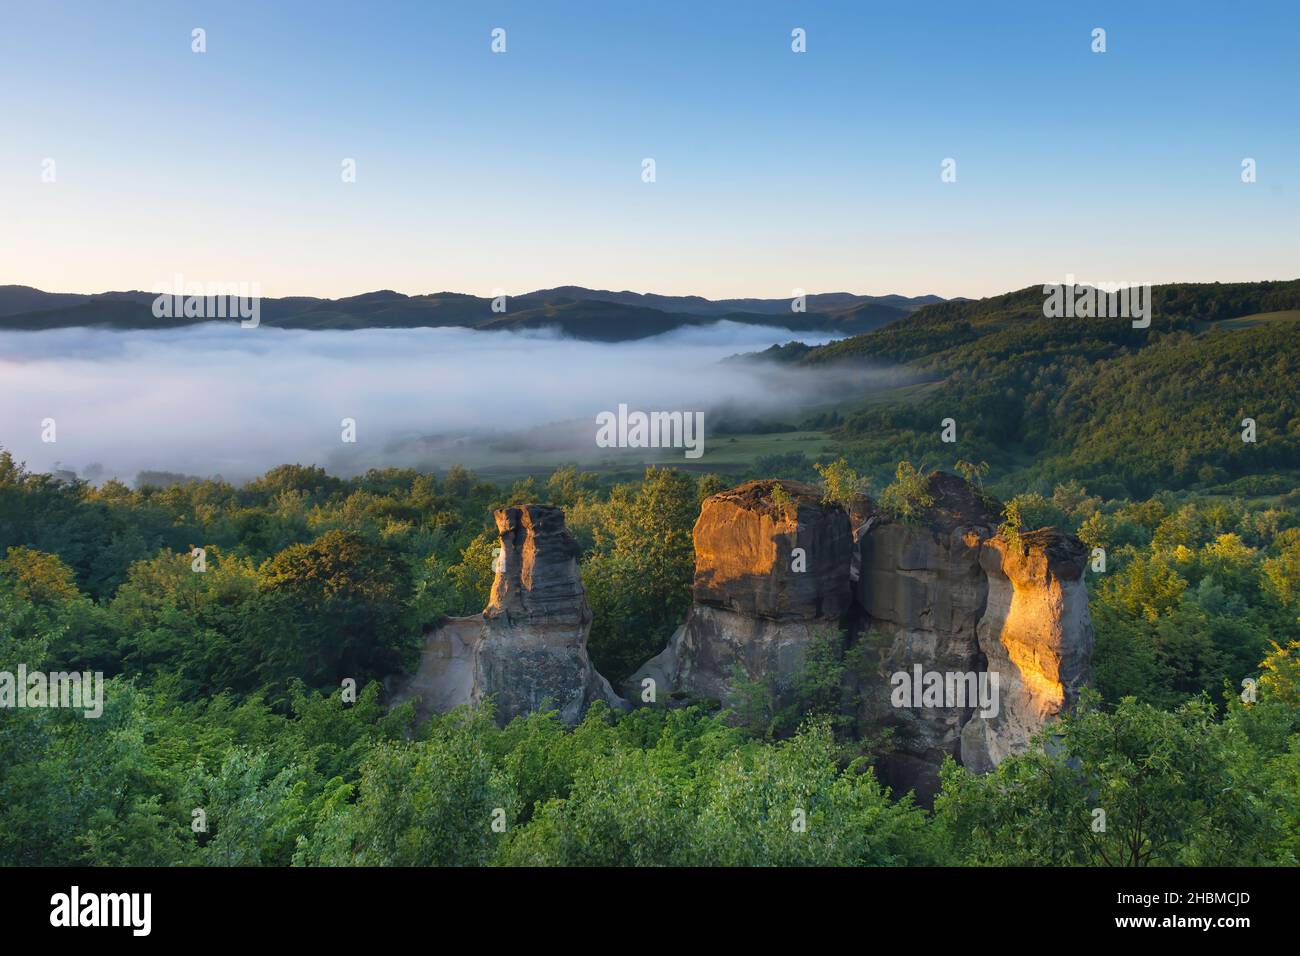 The rock towers of the Dragons Garden (Gradina Zmeilor ), a protected geological nature reserve in Salaj, Transylvania region, Romania, at sunrise Stock Photo